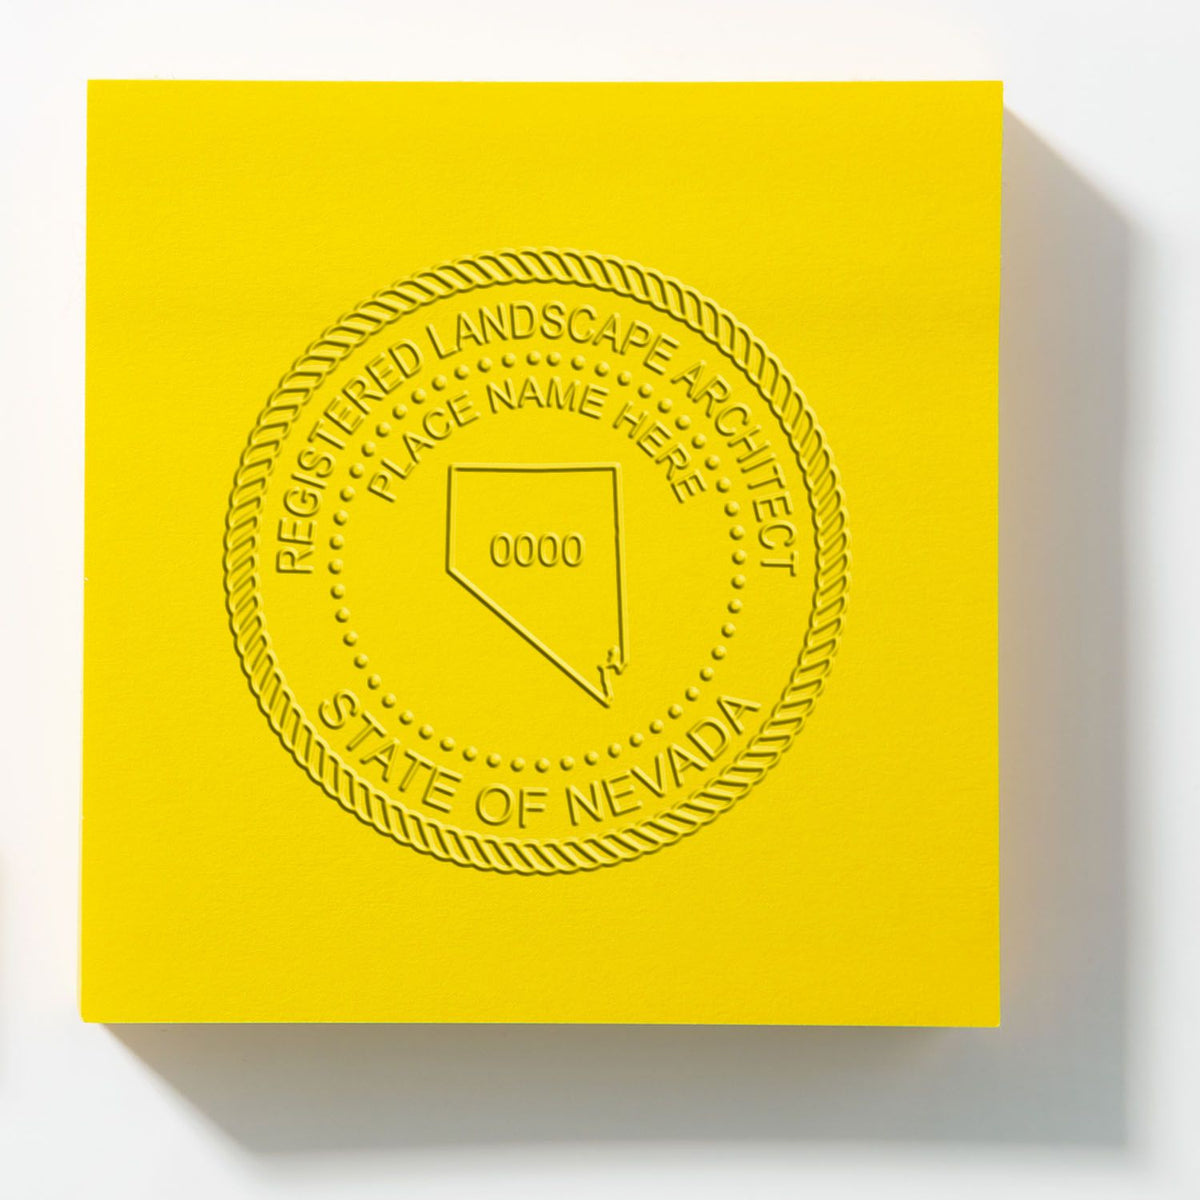 An alternative view of the Gift Nevada Landscape Architect Seal stamped on a sheet of paper showing the image in use